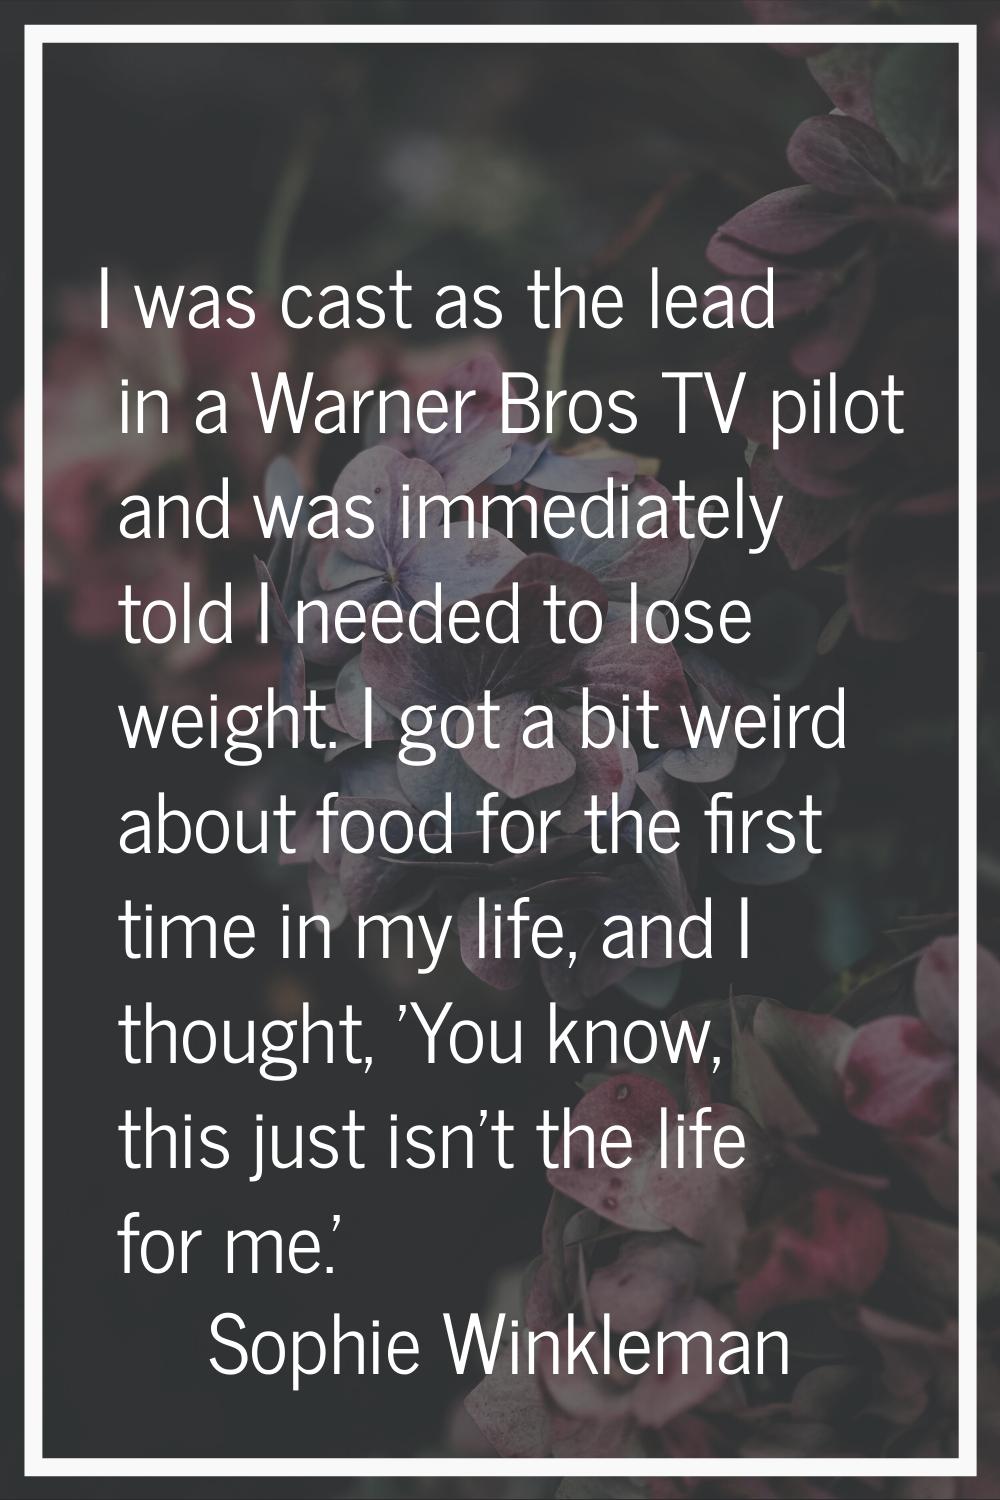 I was cast as the lead in a Warner Bros TV pilot and was immediately told I needed to lose weight. 